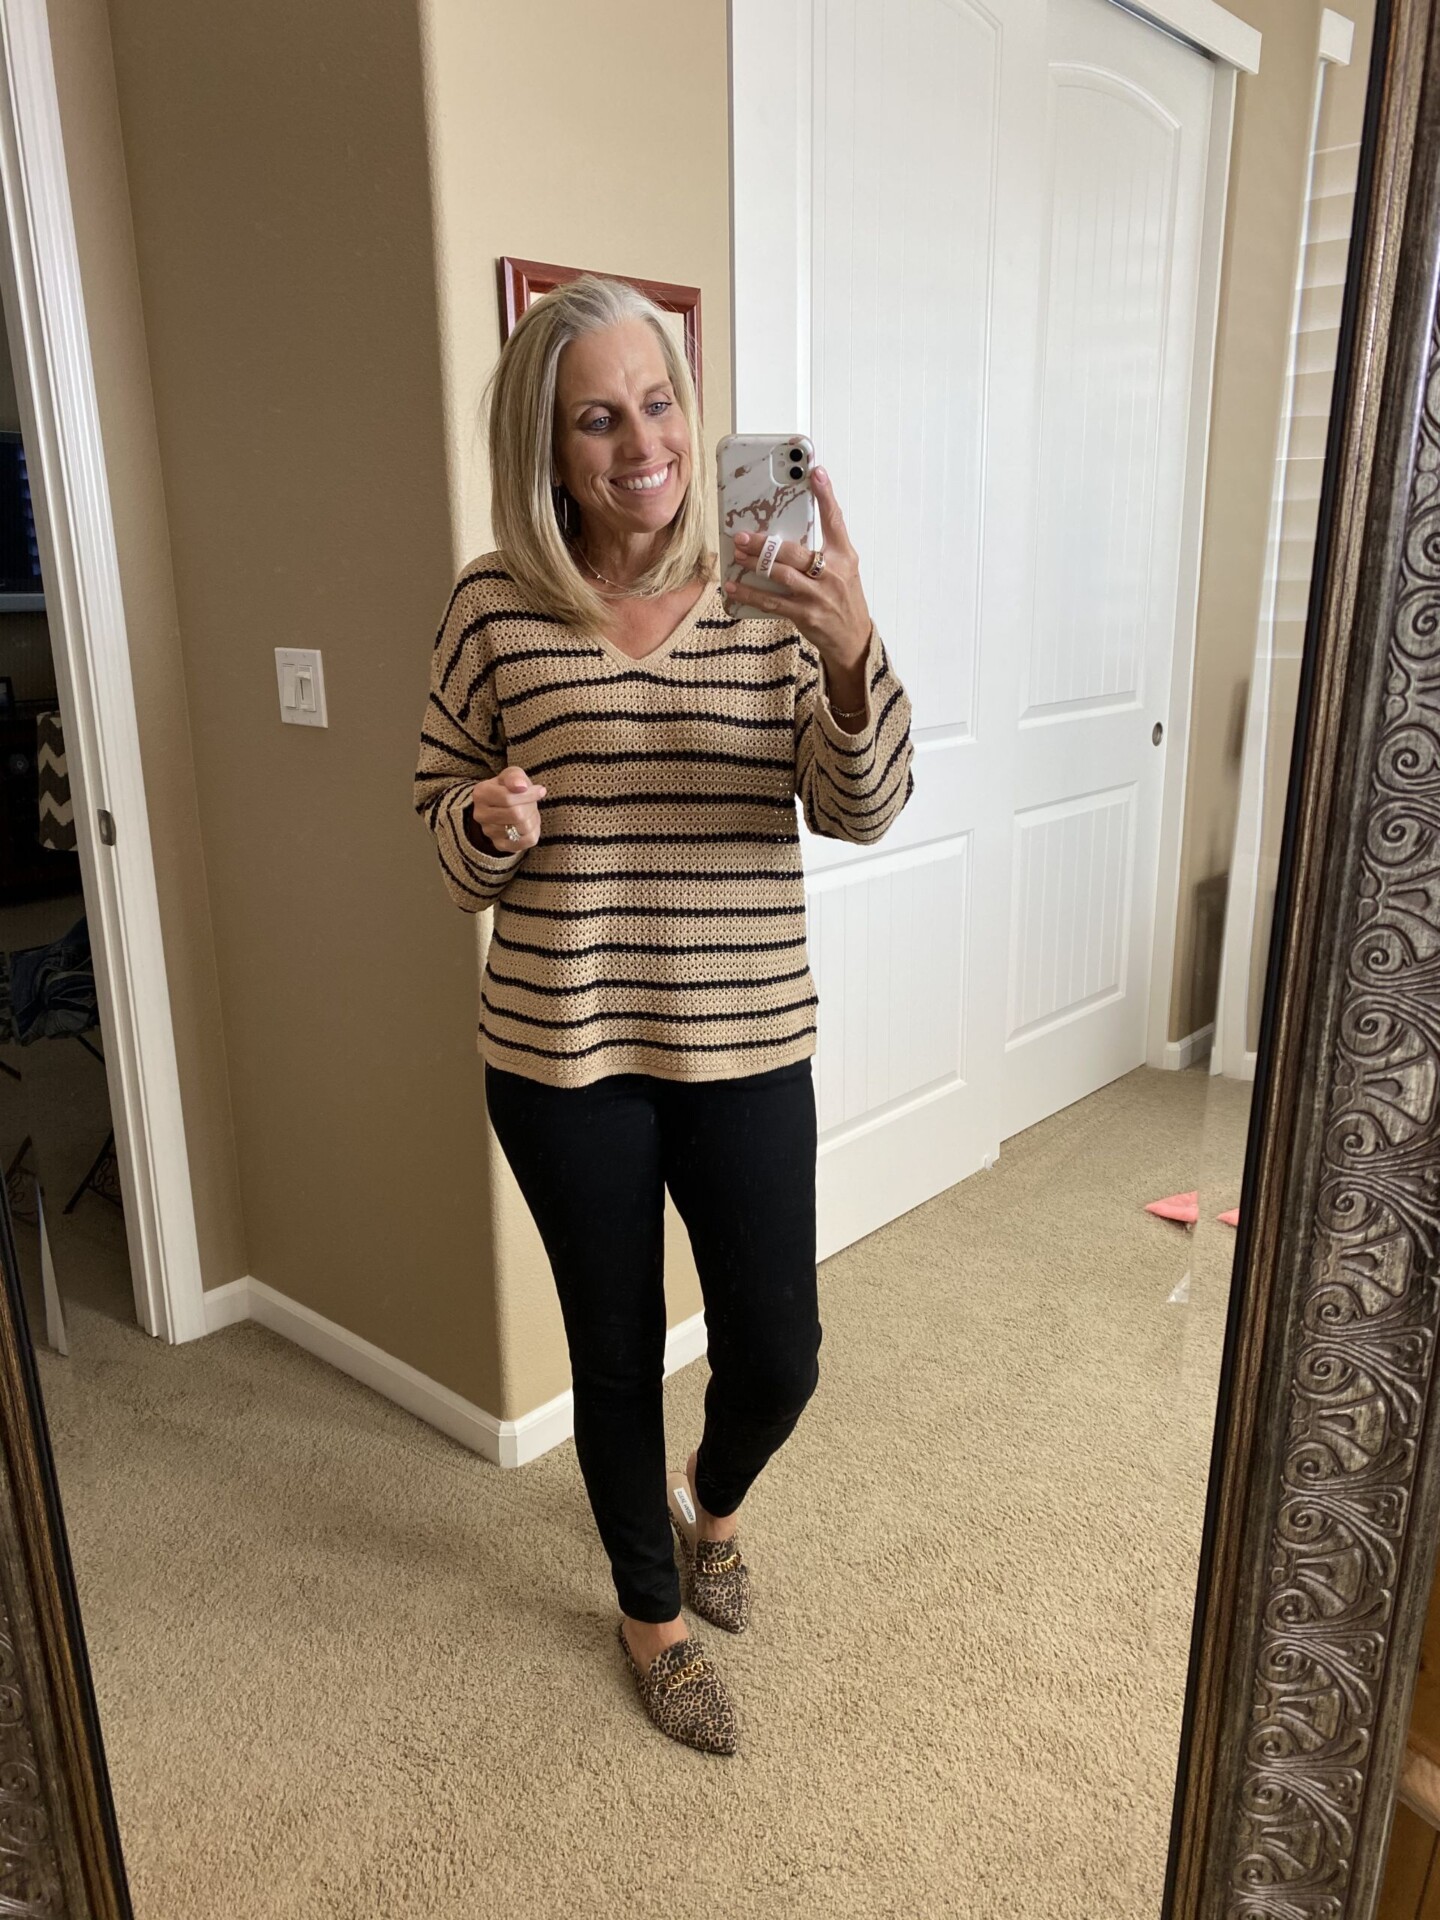 Old Navy sweater